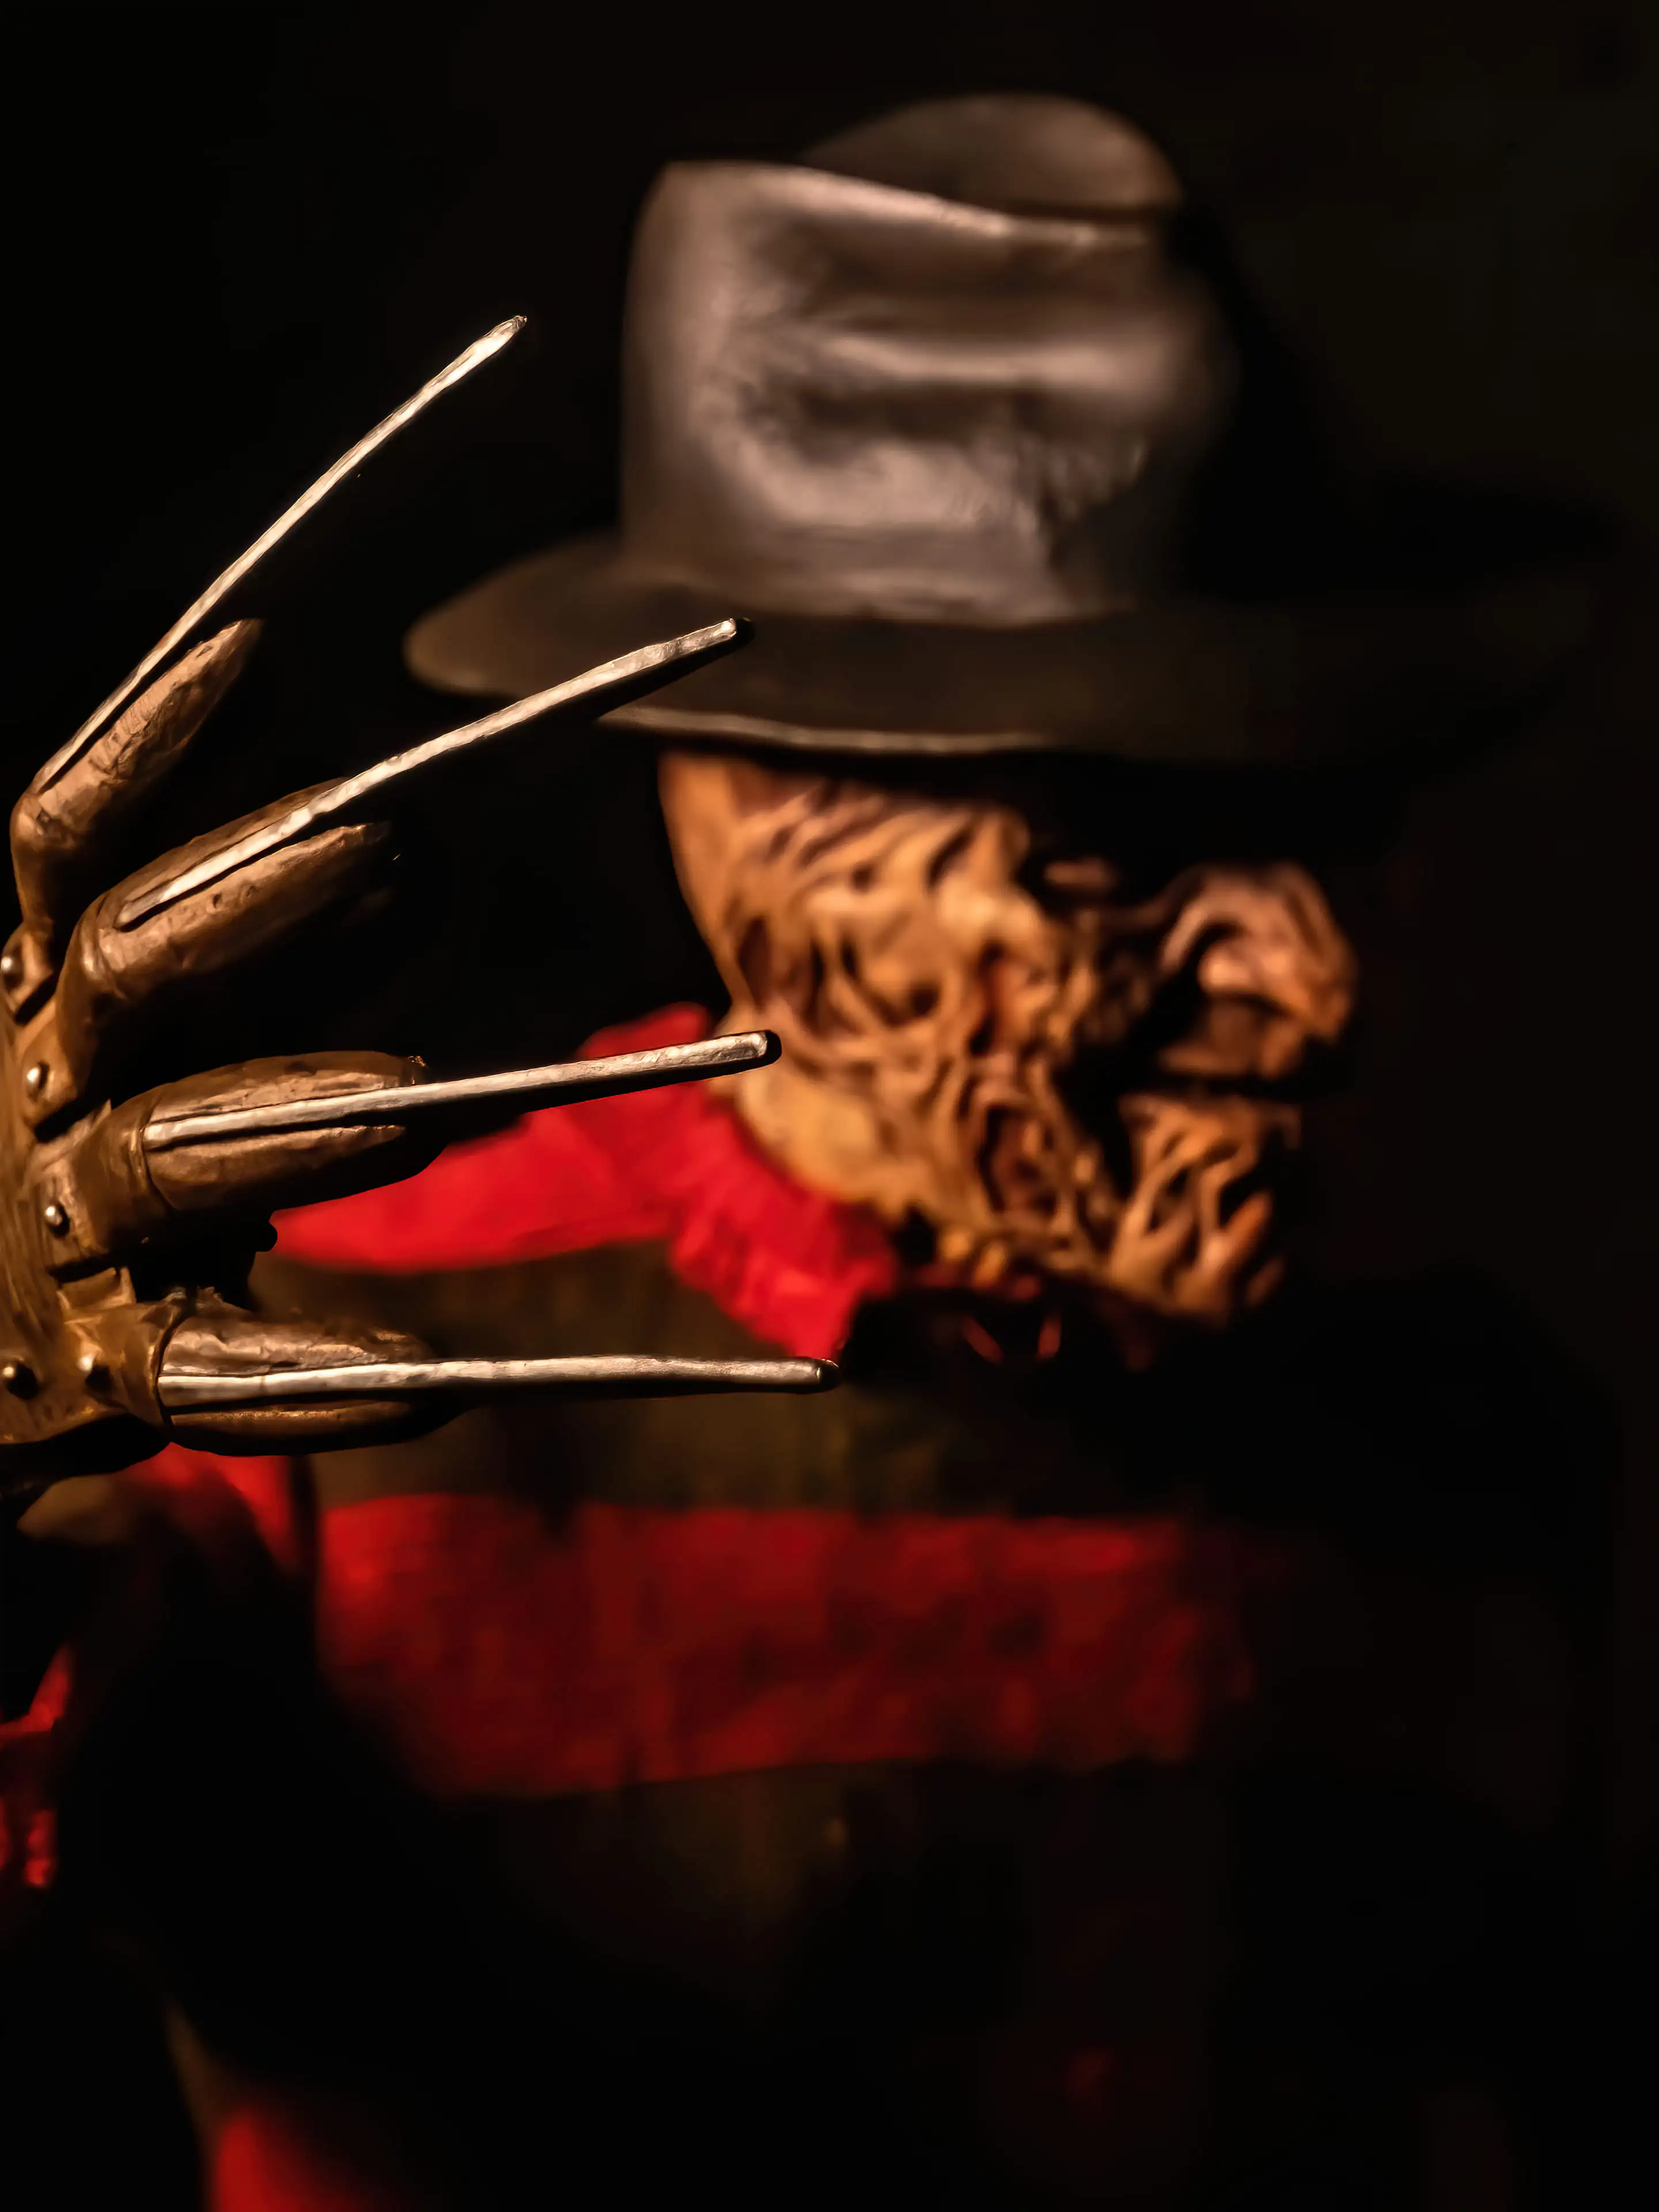 Freddy Krueger Wallpaper  Download to your mobile from PHONEKY